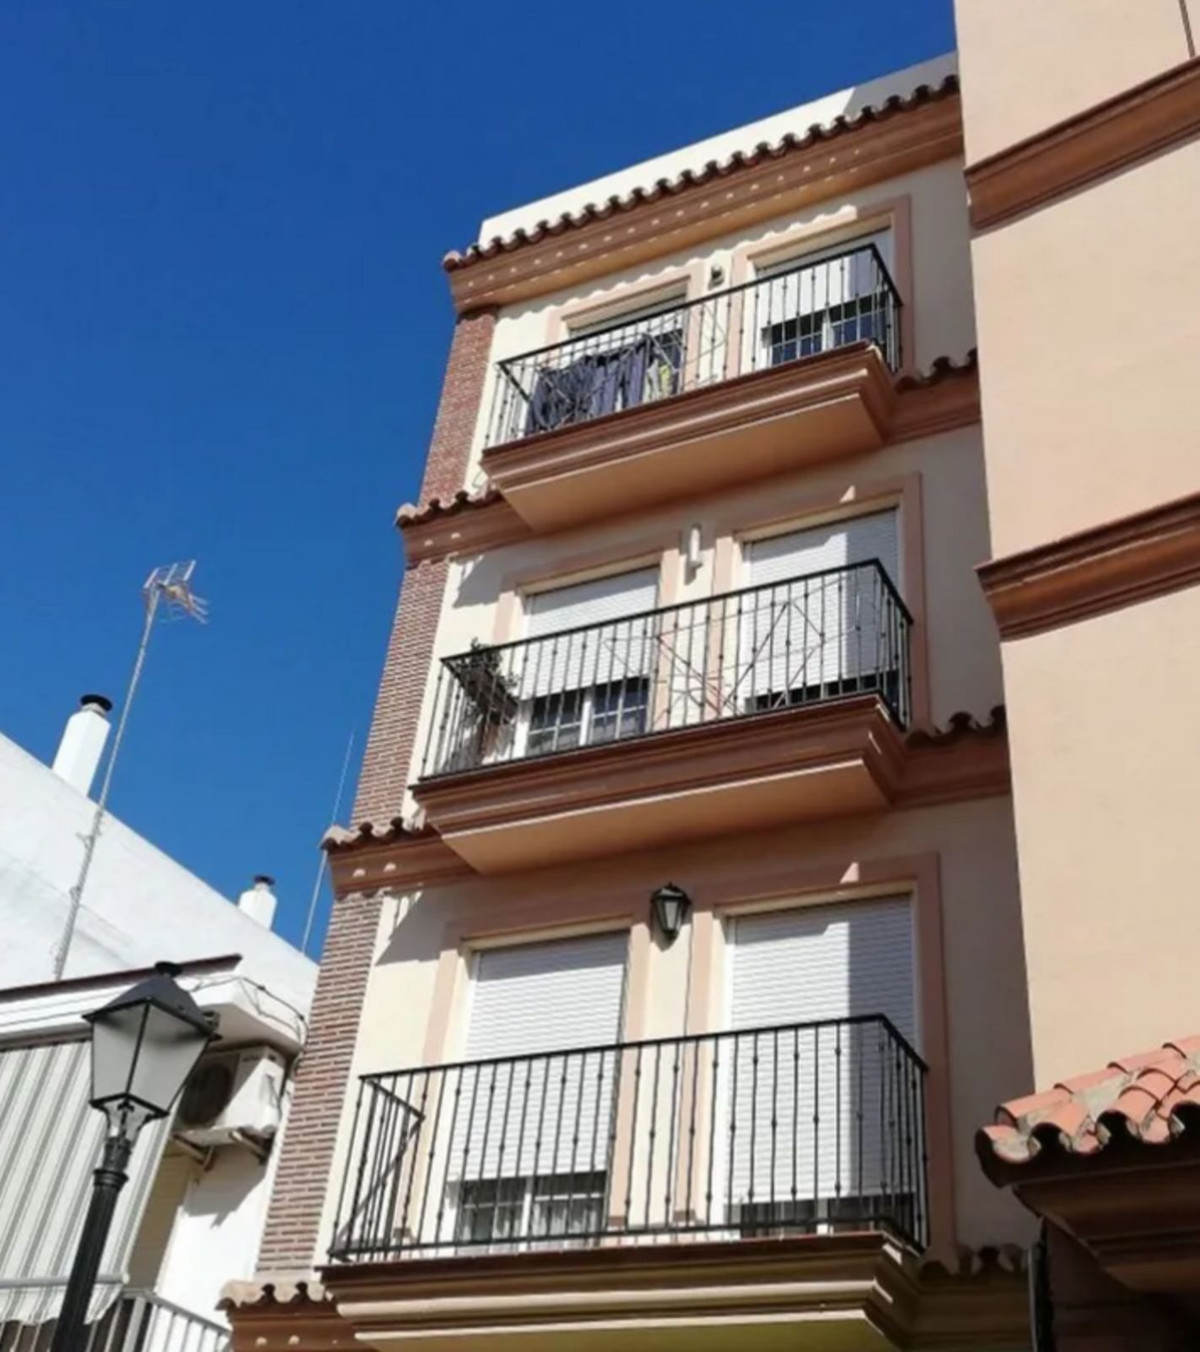 ! Great opportunity!
269 ??m2 building for sale in the heart of Fuengirola. The building has 4 floor, Spain